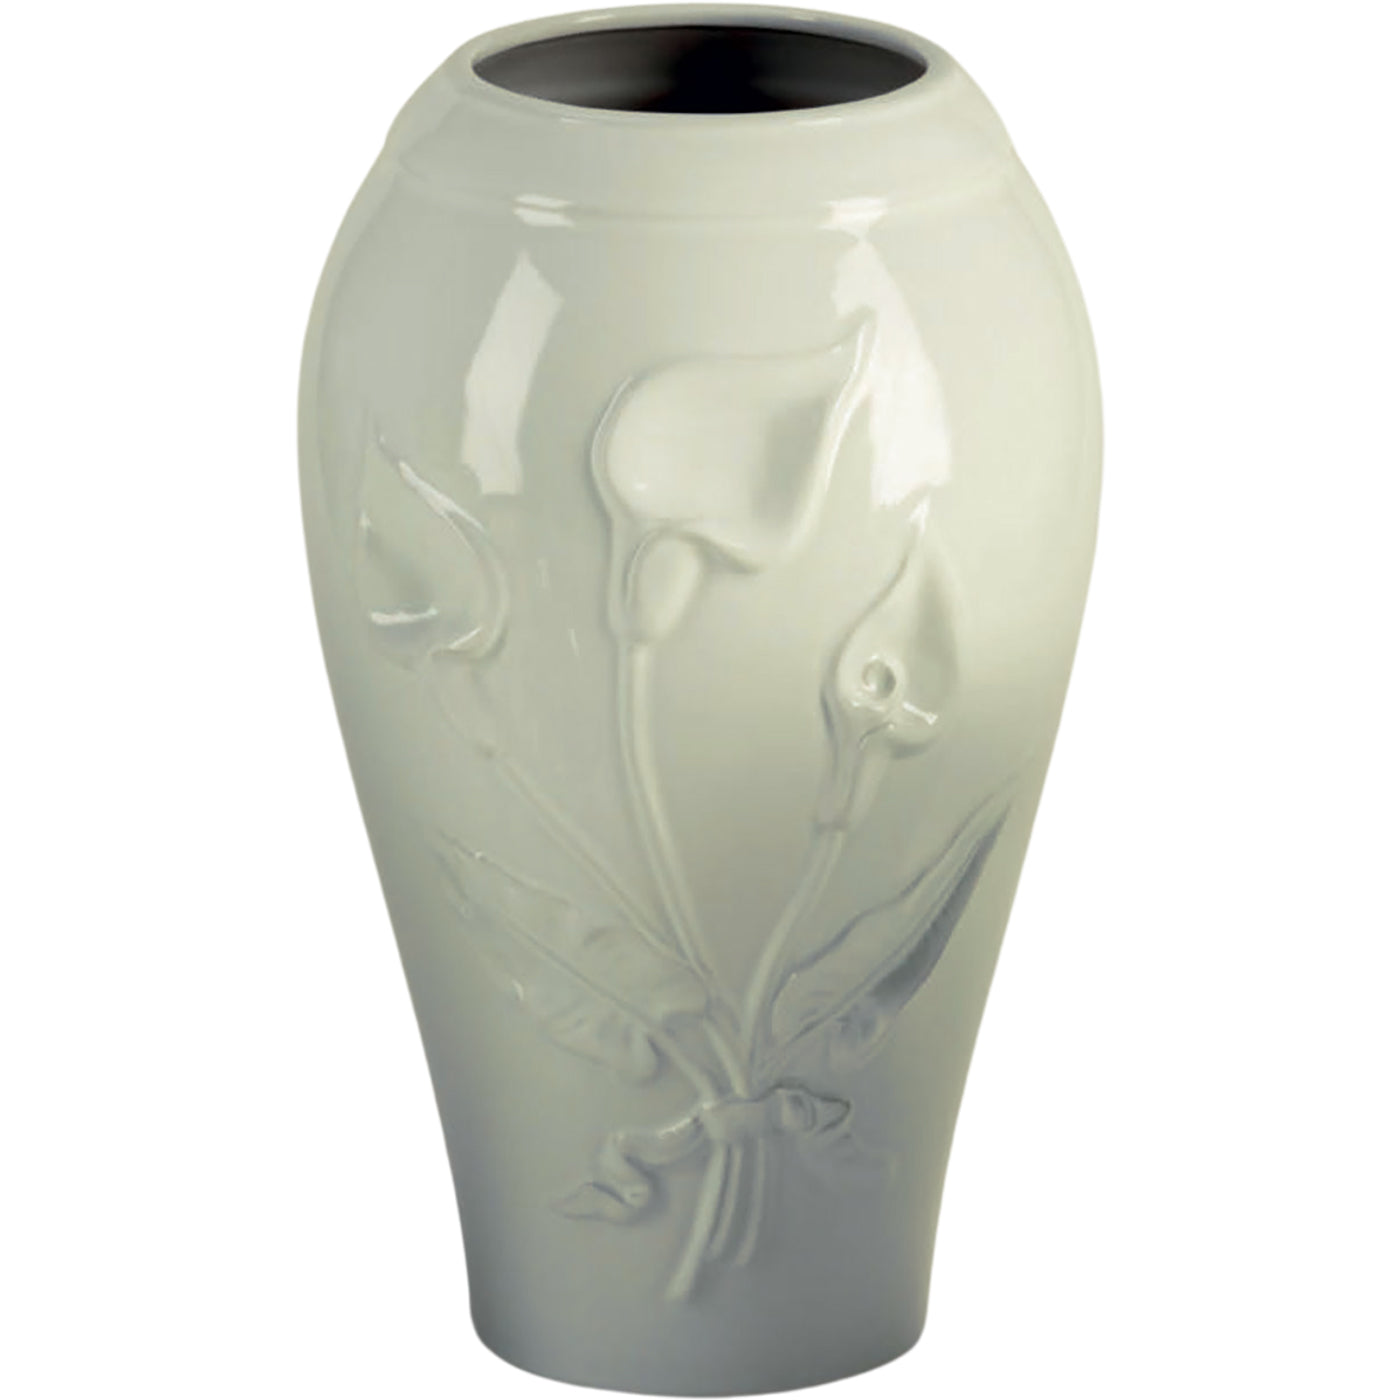 Grave vase Calla ivory 21x13cm - 8.3x5.1in In ivory porcelain, ground attached CAL162P/A